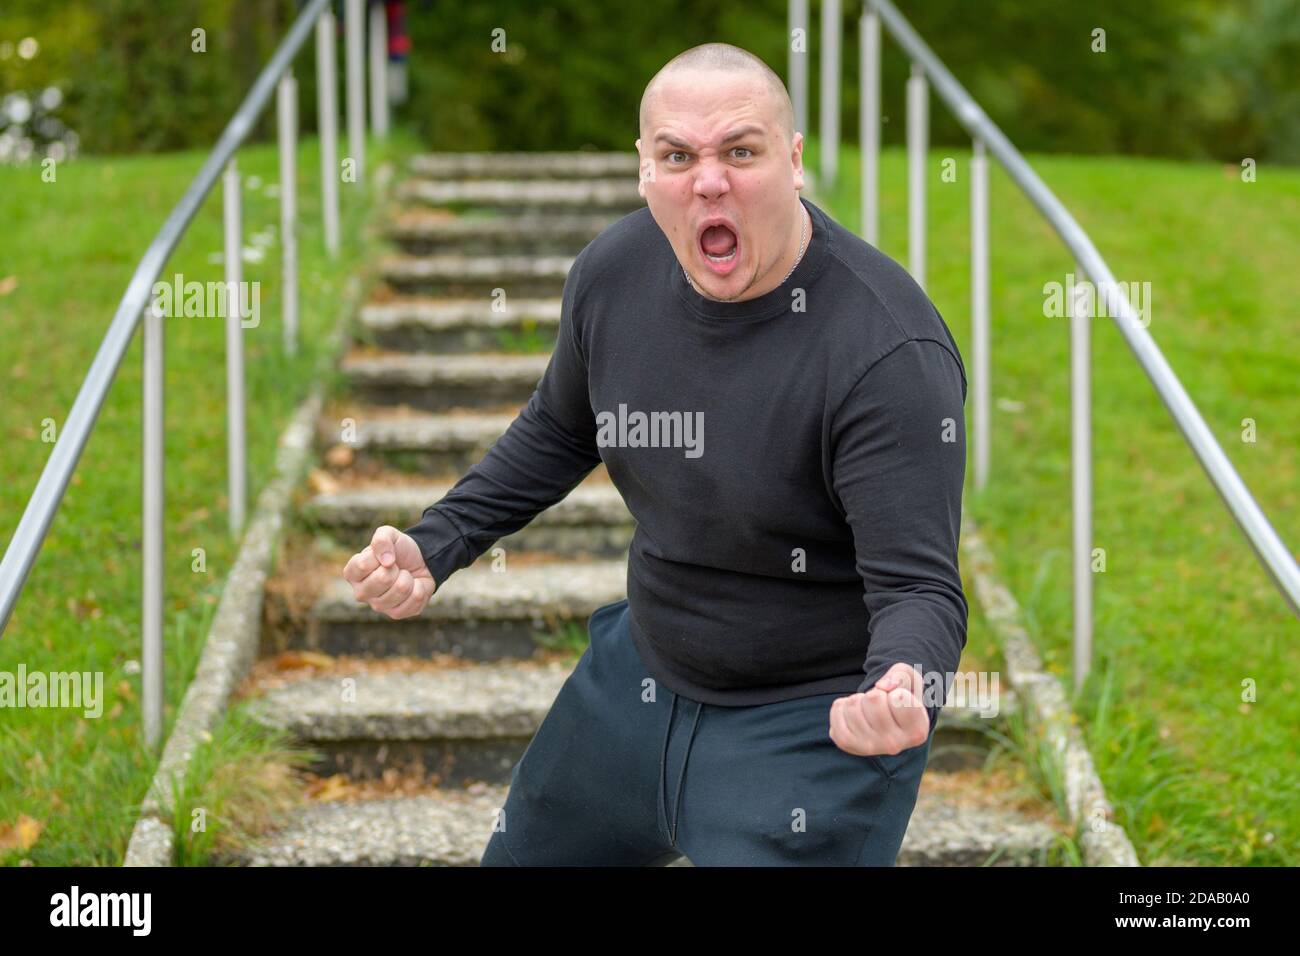 Furious young man yelling at the camera as he stands blocking an exterior set of steps in a park brandishing his fists in anger Stock Photo